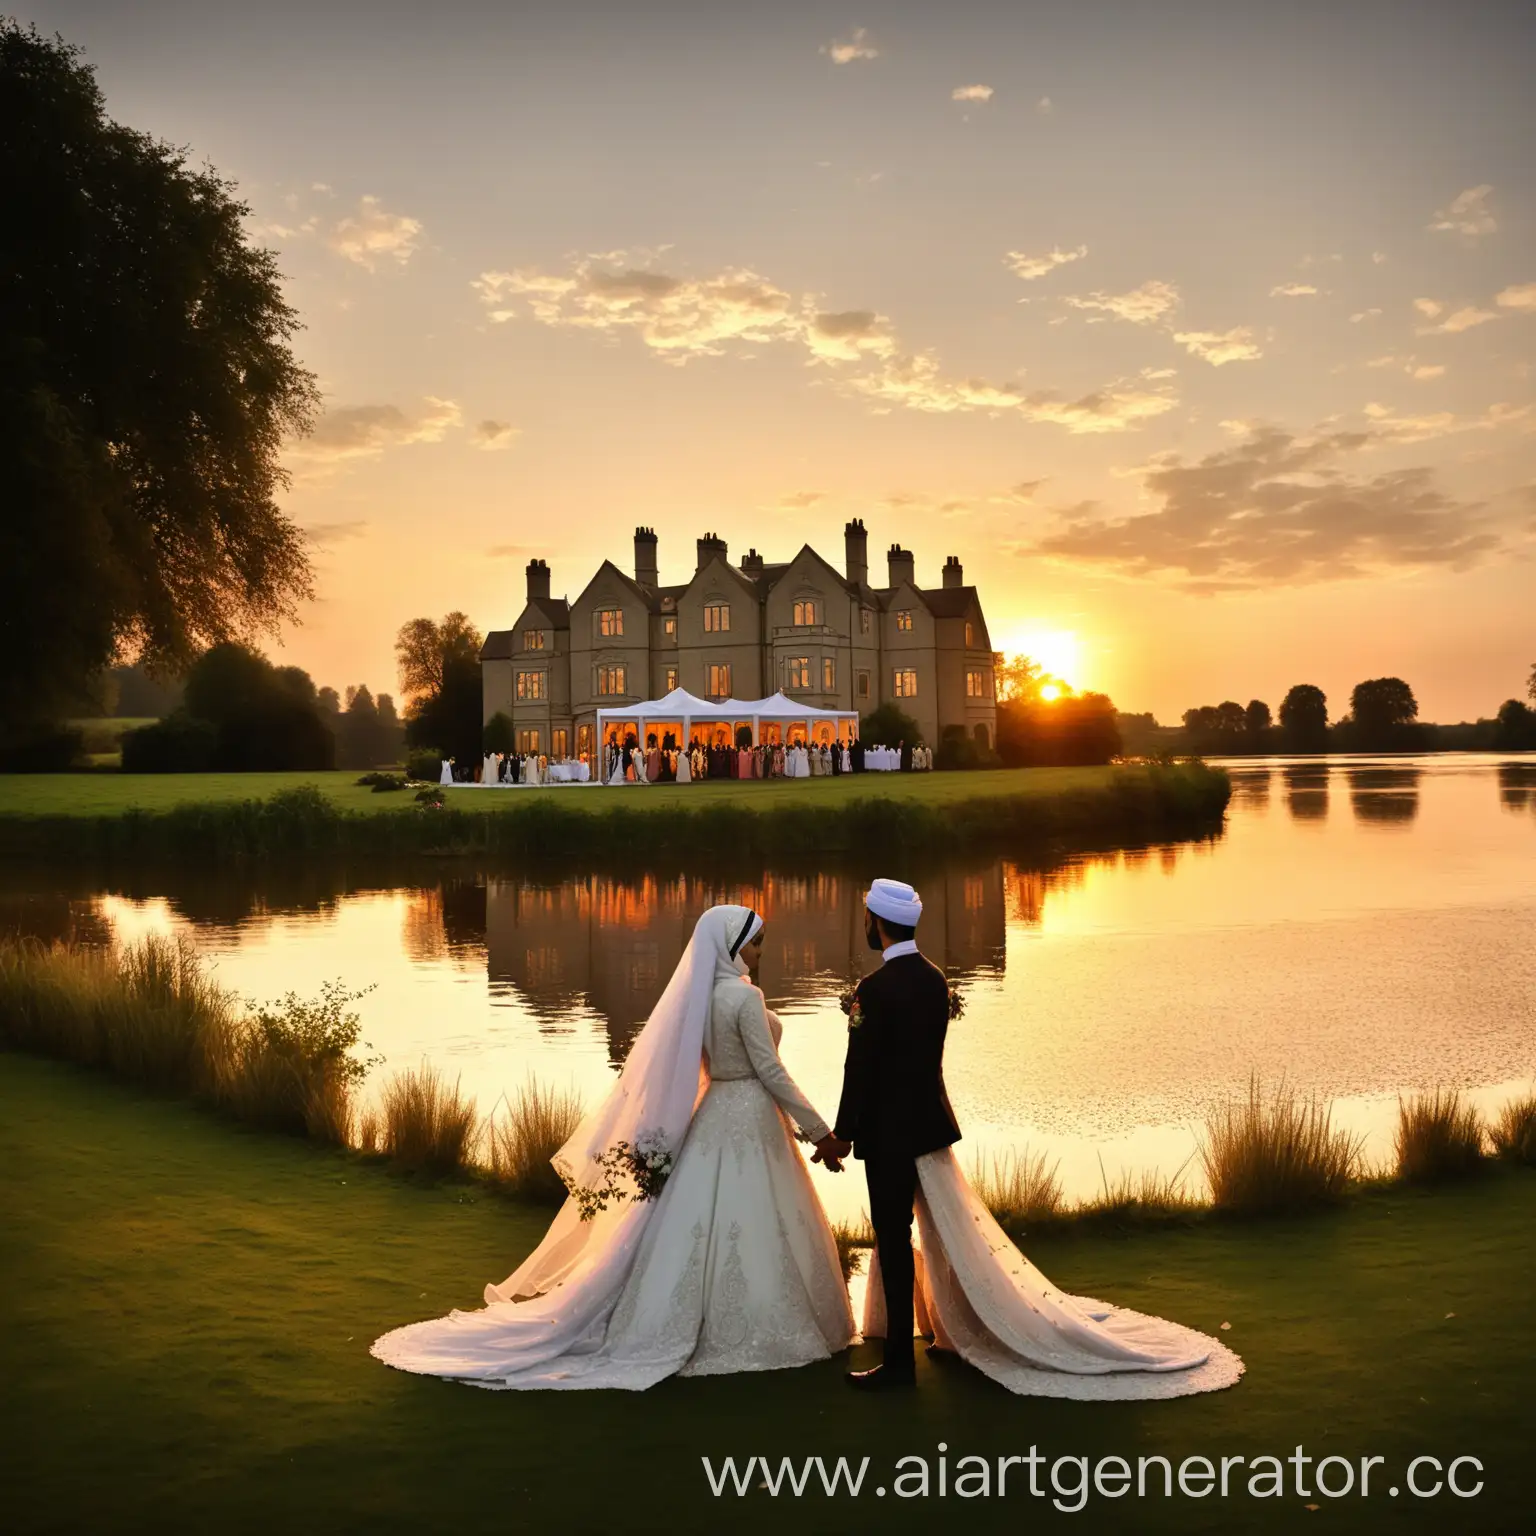 Muslim-Couples-Romantic-Riverbank-Wedding-at-Country-House-Sunset